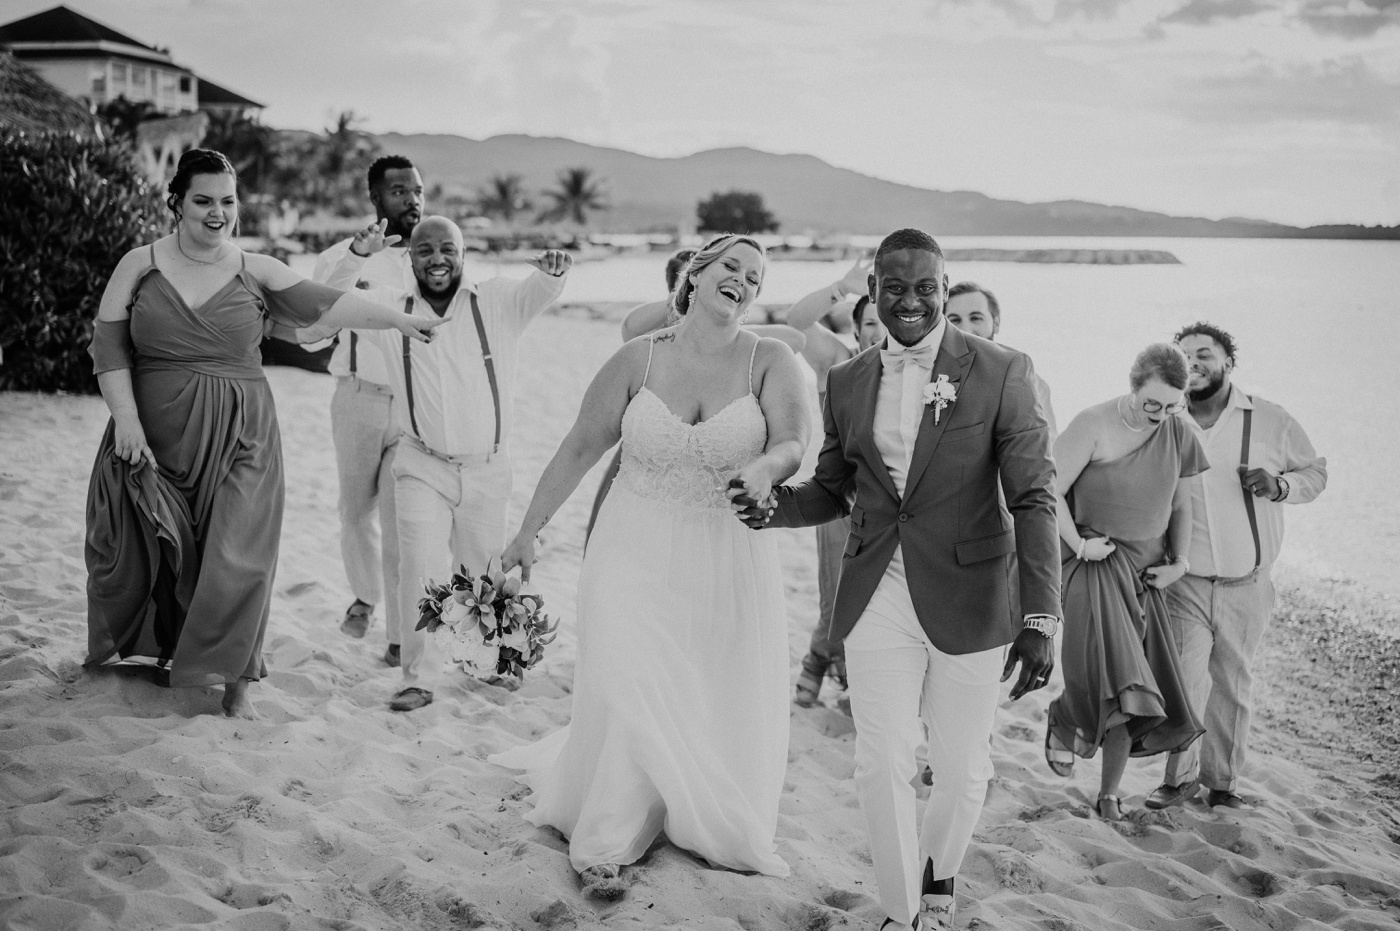 Bridal party portraits on the beach in Jamaica